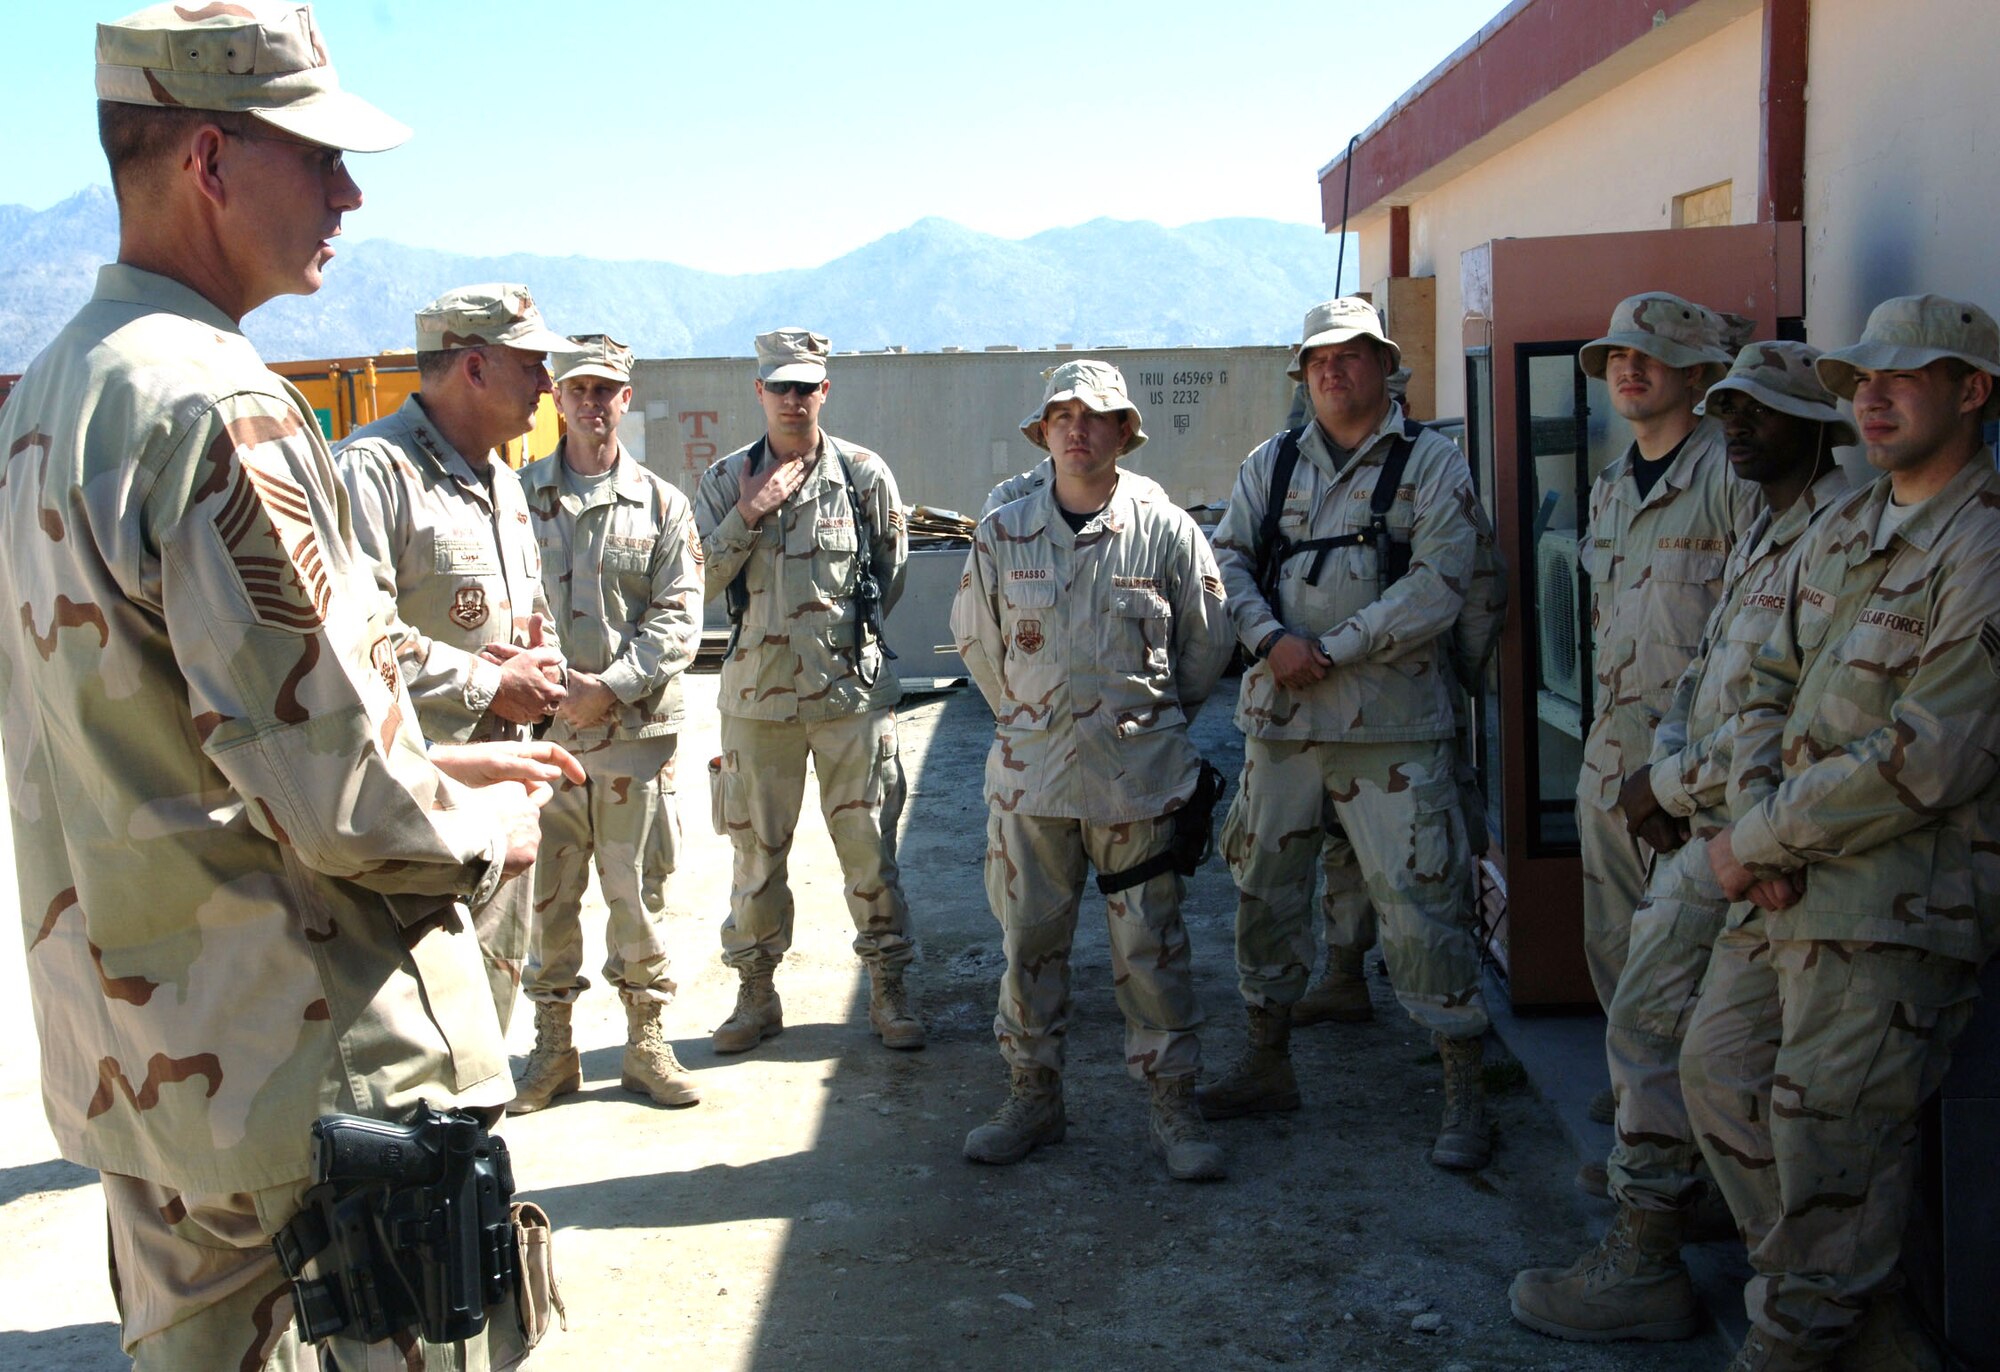 Lieutenant Gen. Gary North and Chief Master Sgt. Richard Small visit with Airmen at the Mehtar Lam Provincial Reconstruction Team in Afghanistan. General North is the U.S. Central Command Air Forces commander and Chief Small is the CENTAF command chief master sergeant. (U.S. Air Force photo/Capt. Travis B. Tougaw)